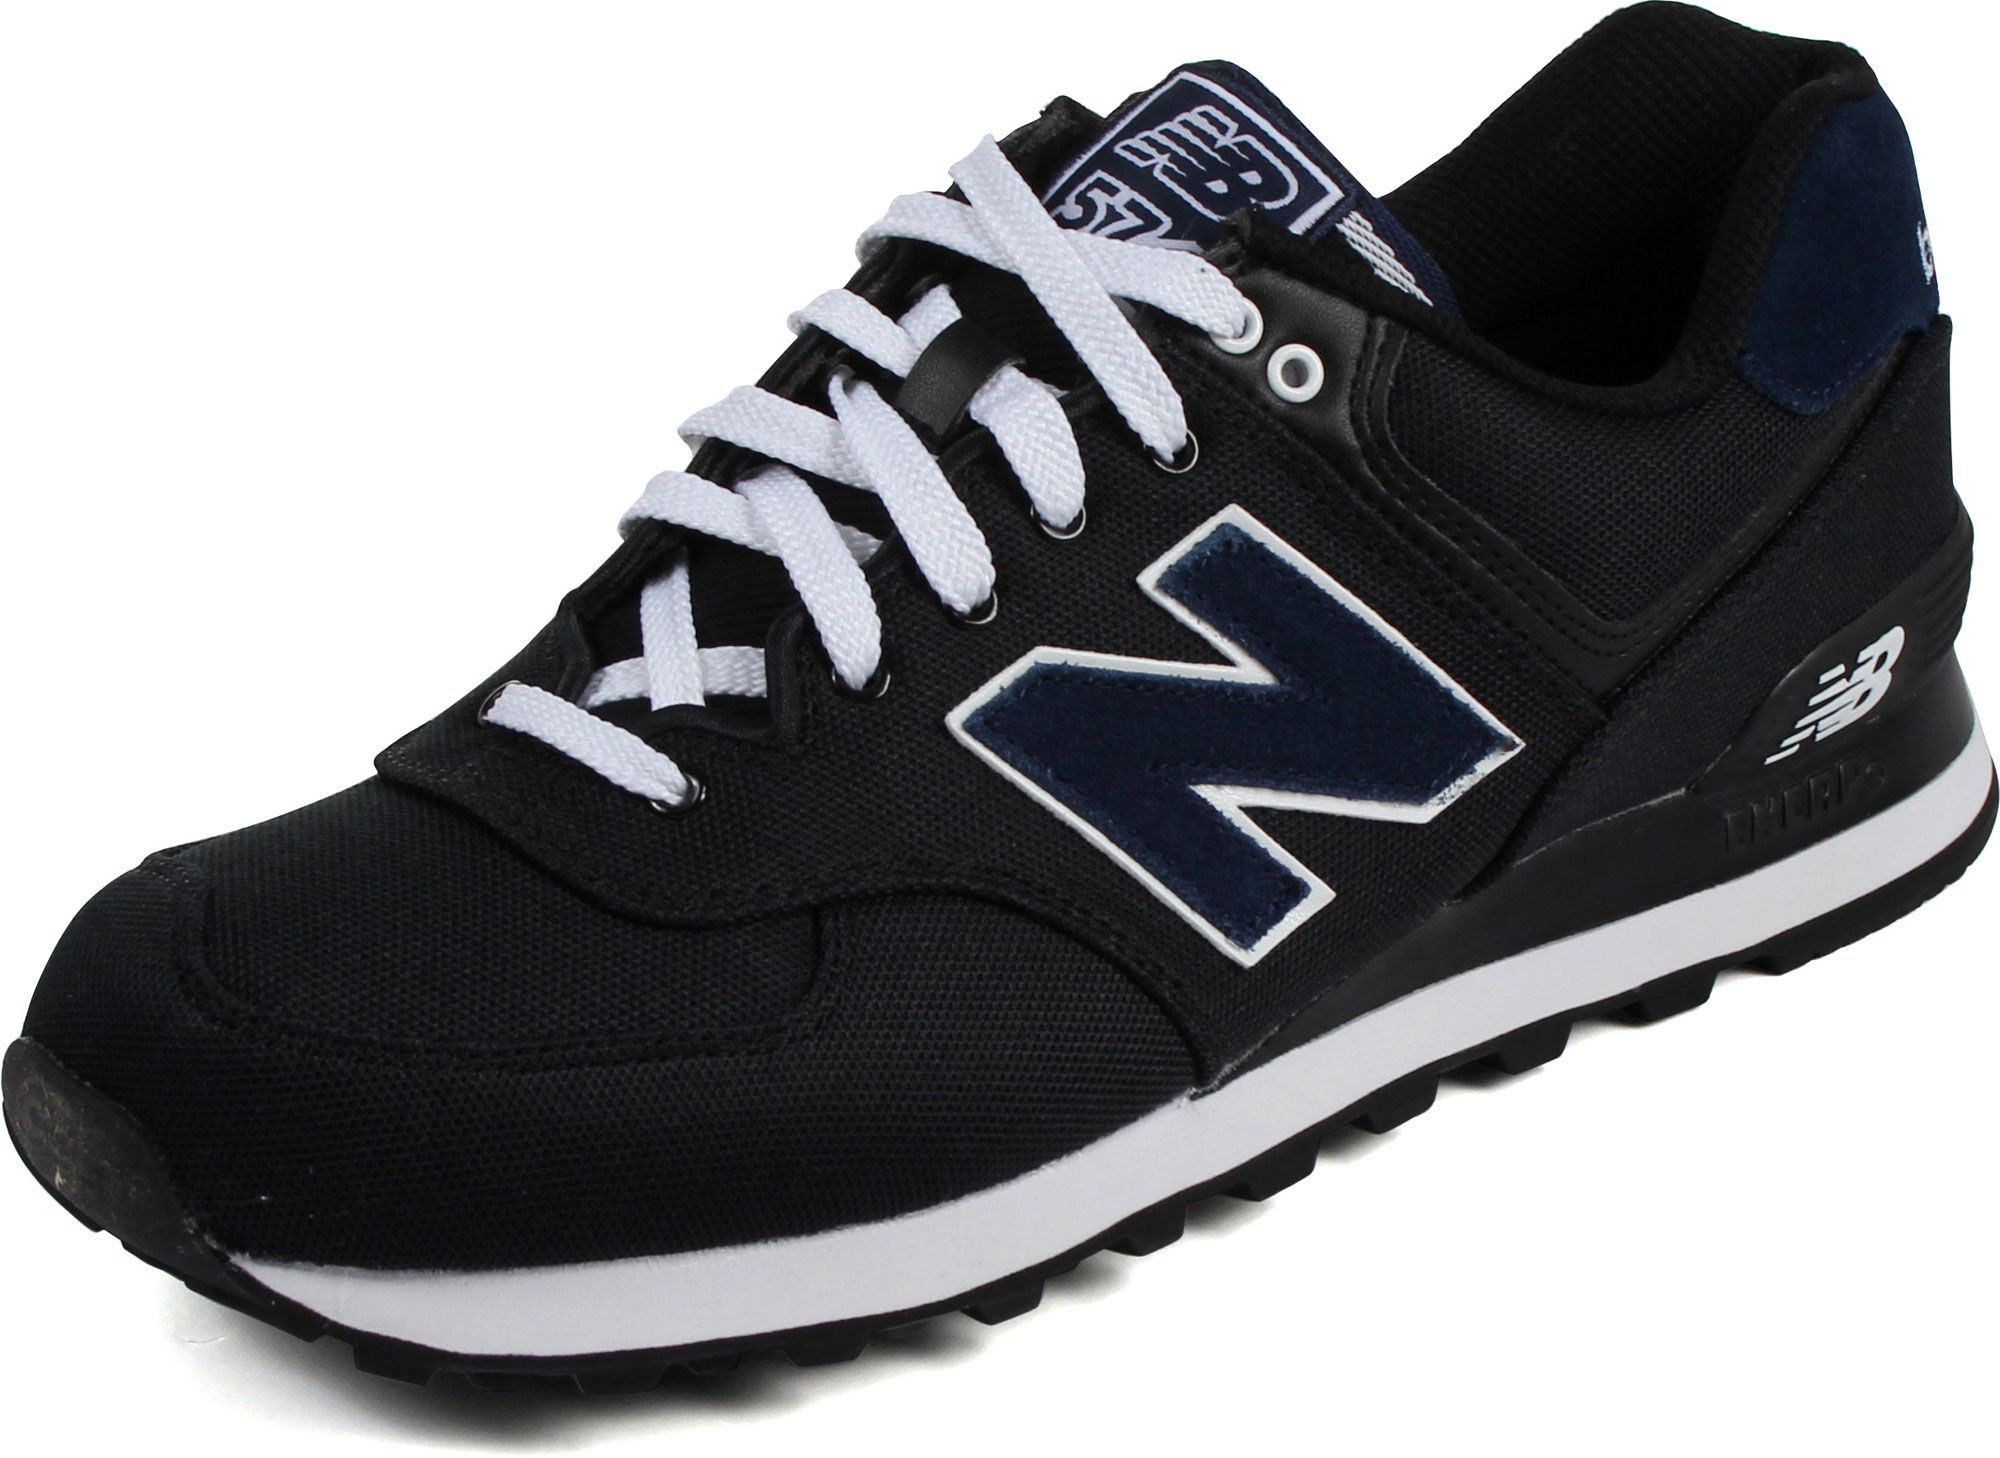 new balance 574 pique polo pack navy blue